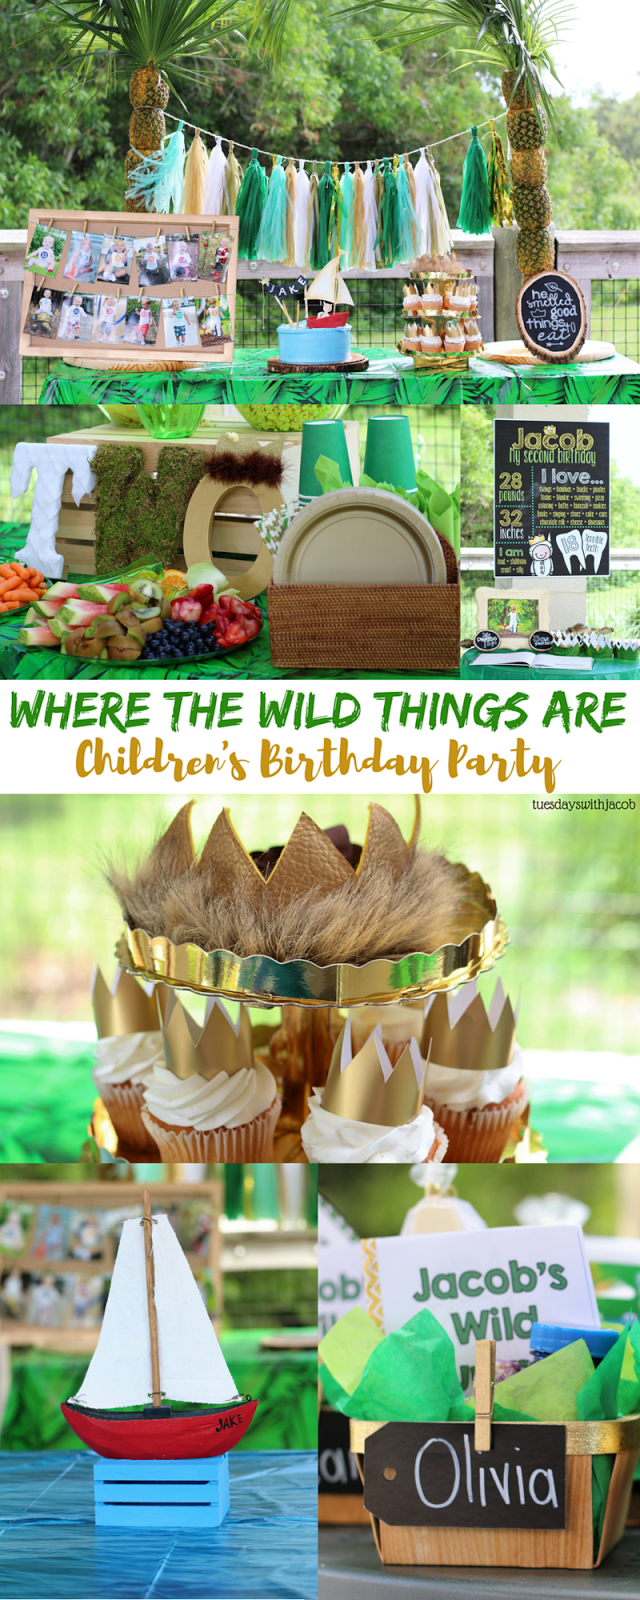 Jacob Is Two Wild Where The Wild Things Are Birthday Party